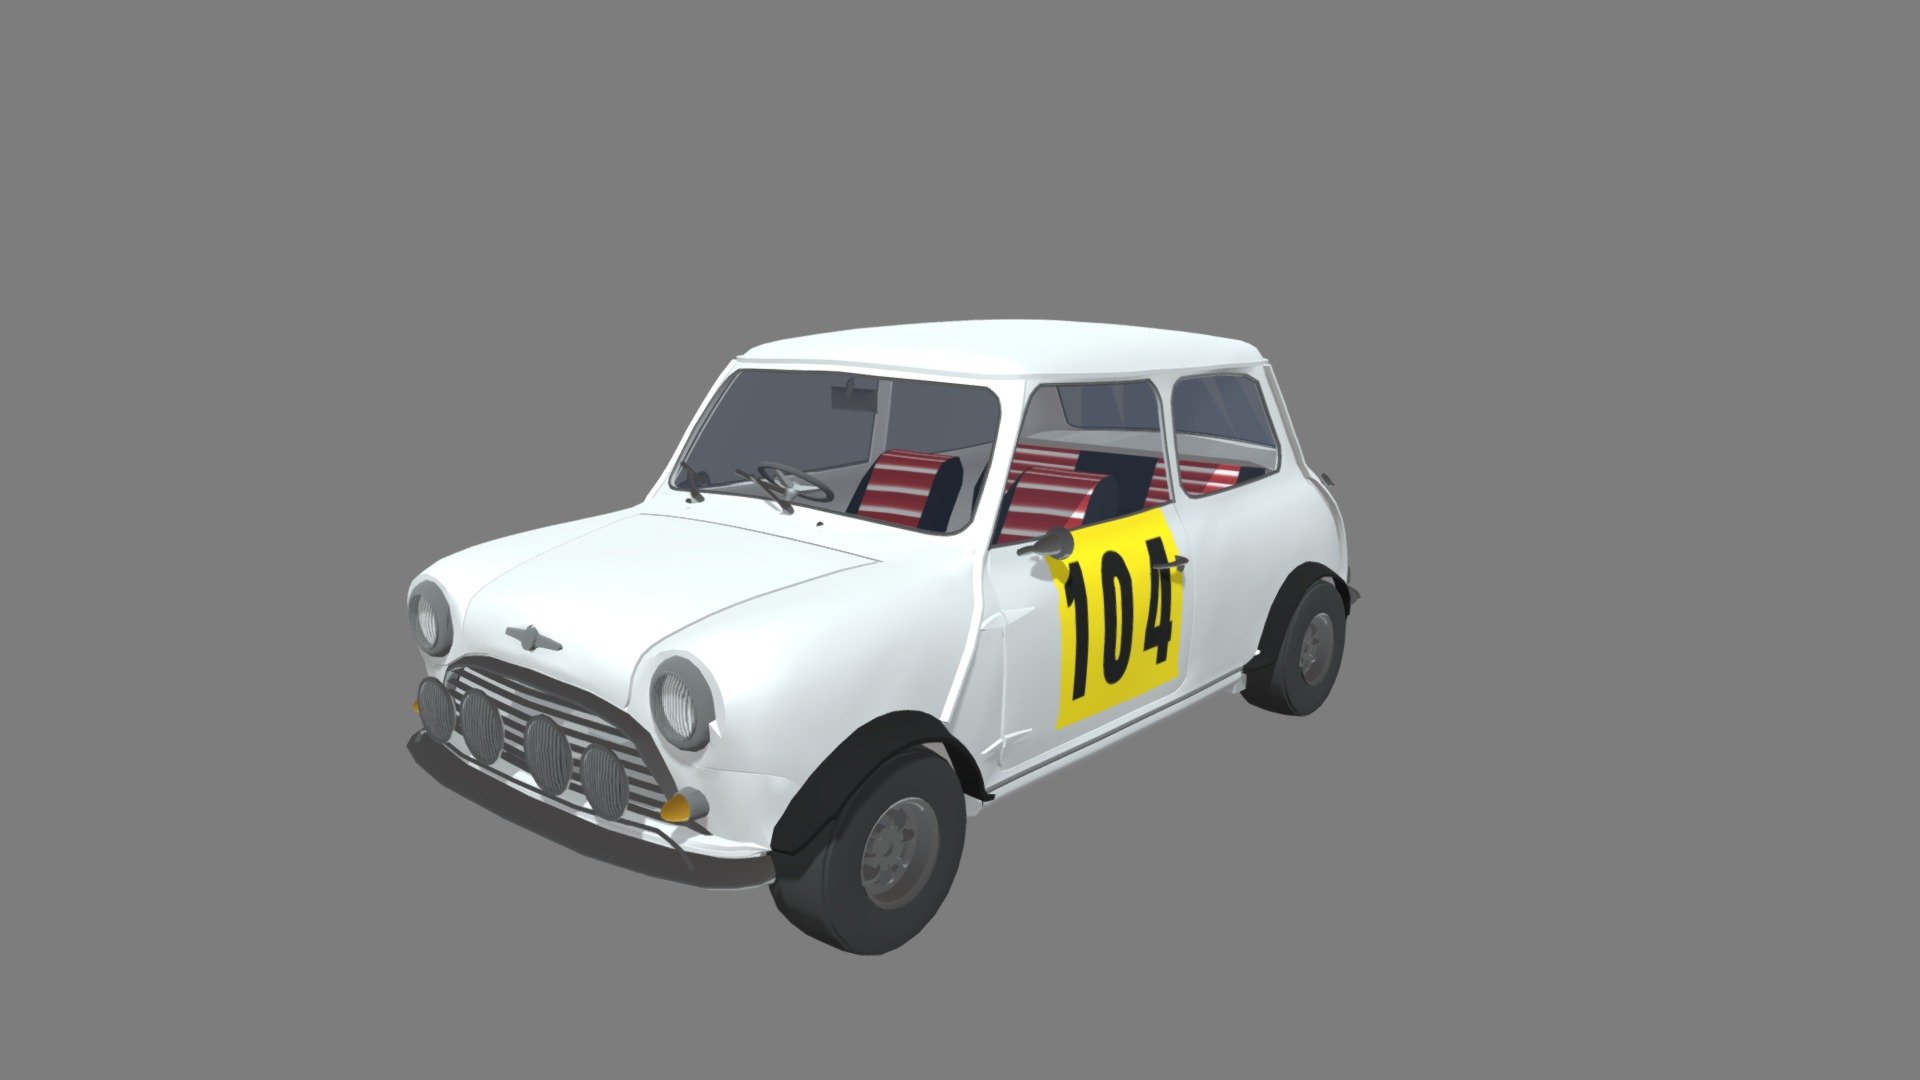 The Morris Mini Cooper 1970 is instantly recognizable with its compact body and unmistakable British styling. Its iconic rounded shape and bold color options make it a head-turner on any road. The compact size not only adds to its adorable appeal but also makes it incredibly agile, perfect for zipping through city streets with ease 3d model